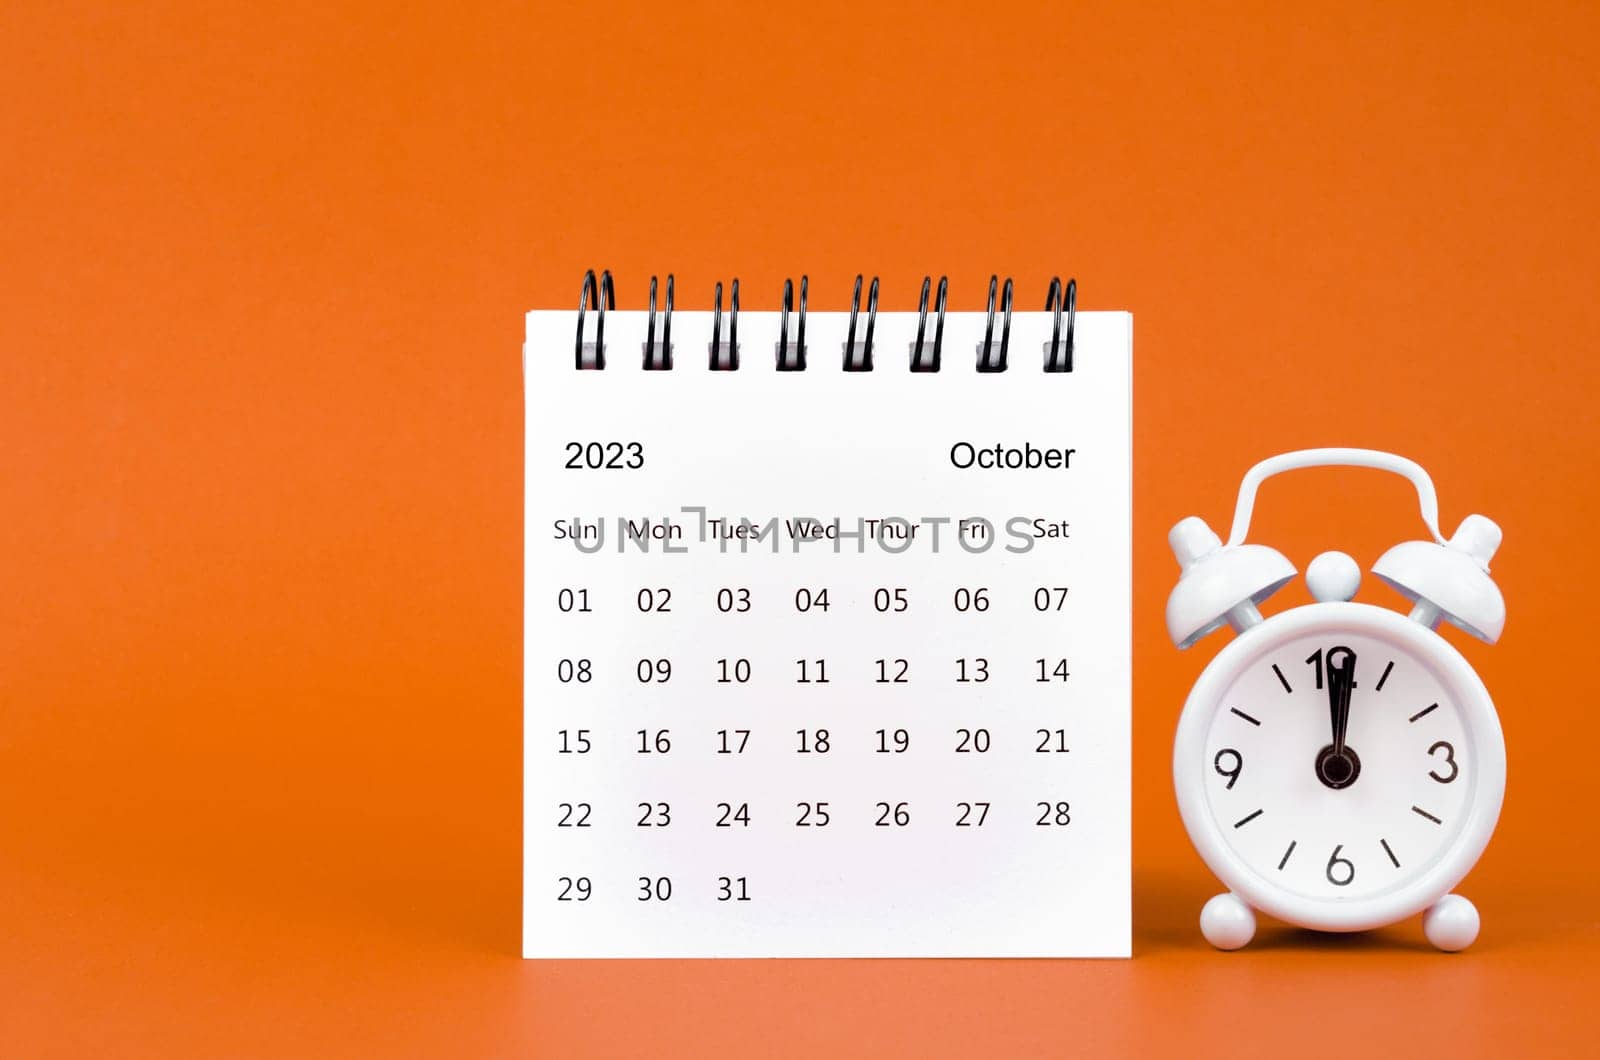 The October 2023 Monthly desk calendar for 2023 year and alarm clock by Gamjai